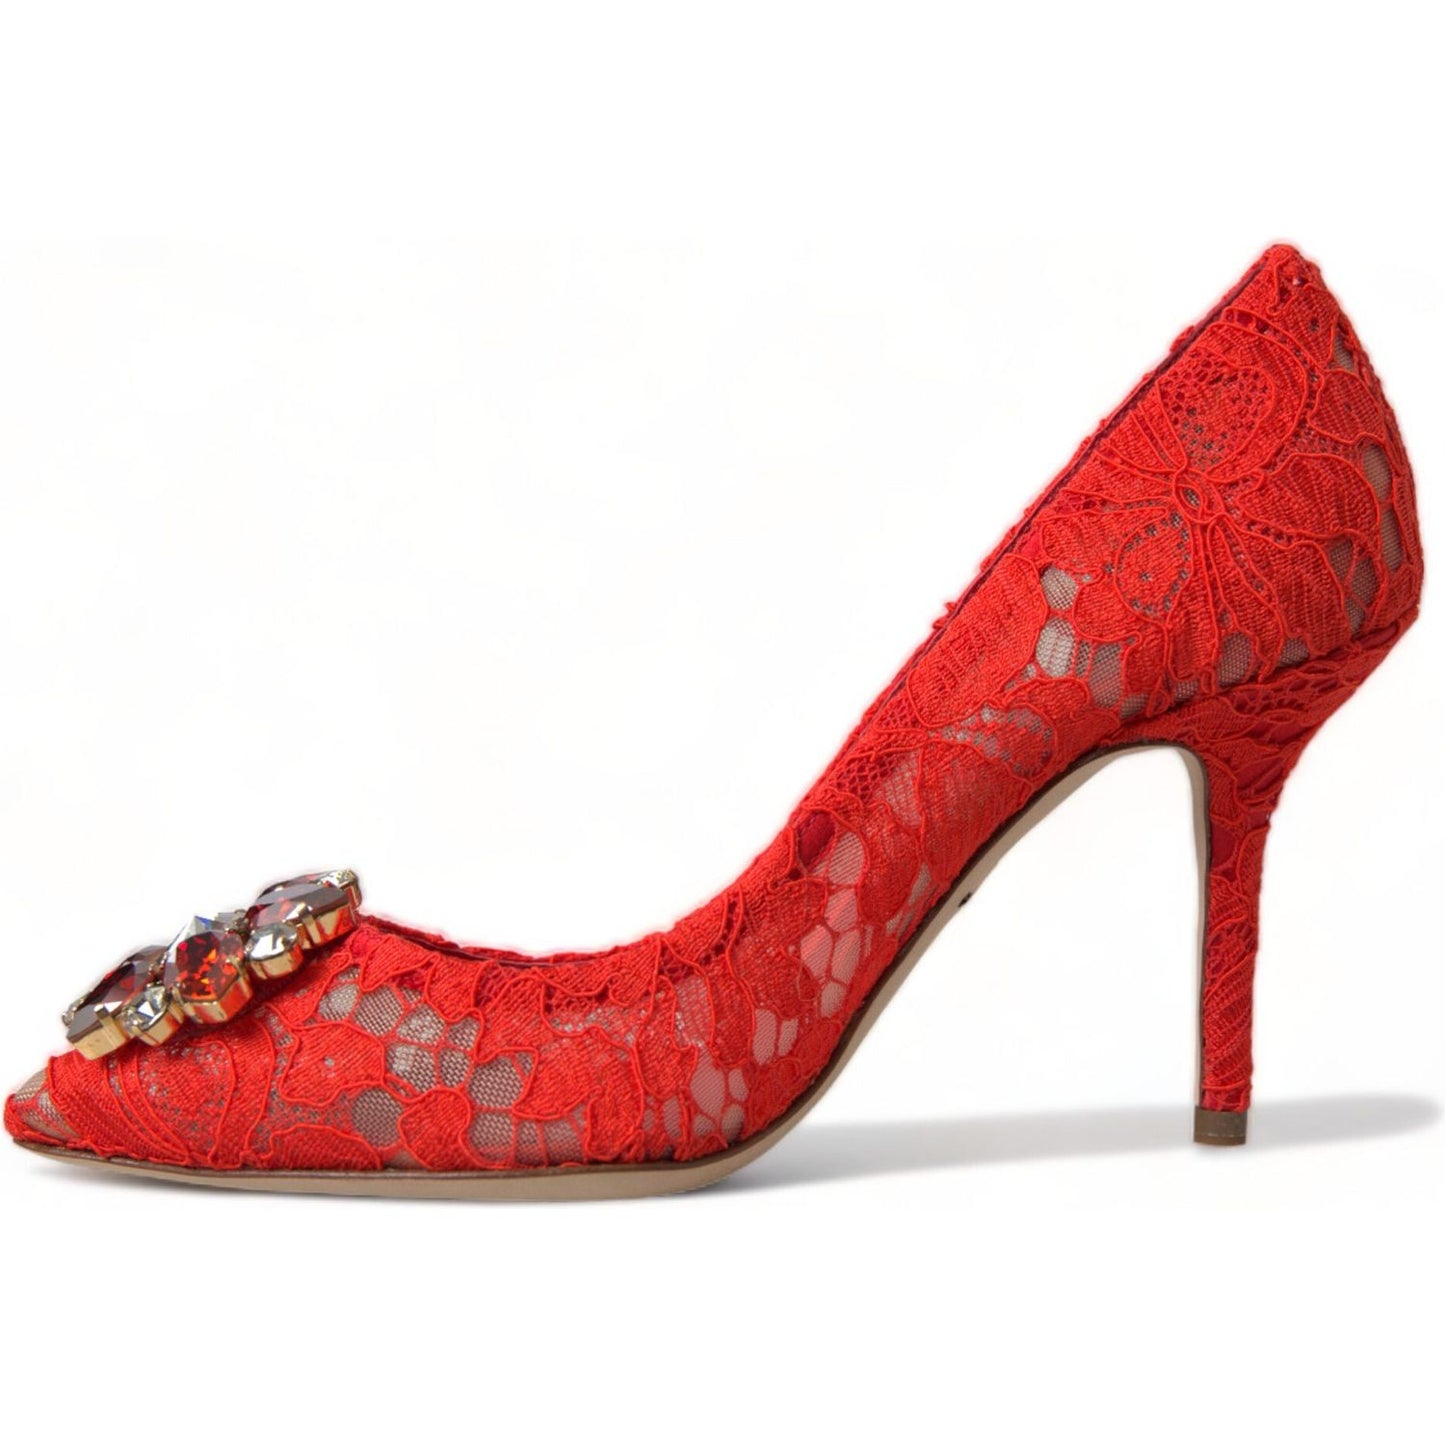 Dolce & Gabbana Exquisite Crystal-Embellished Red Lace Heels red-taormina-lace-crystal-heels-pumps-shoes-1 465A9195-bg-scaled-5293a007-31a.jpg